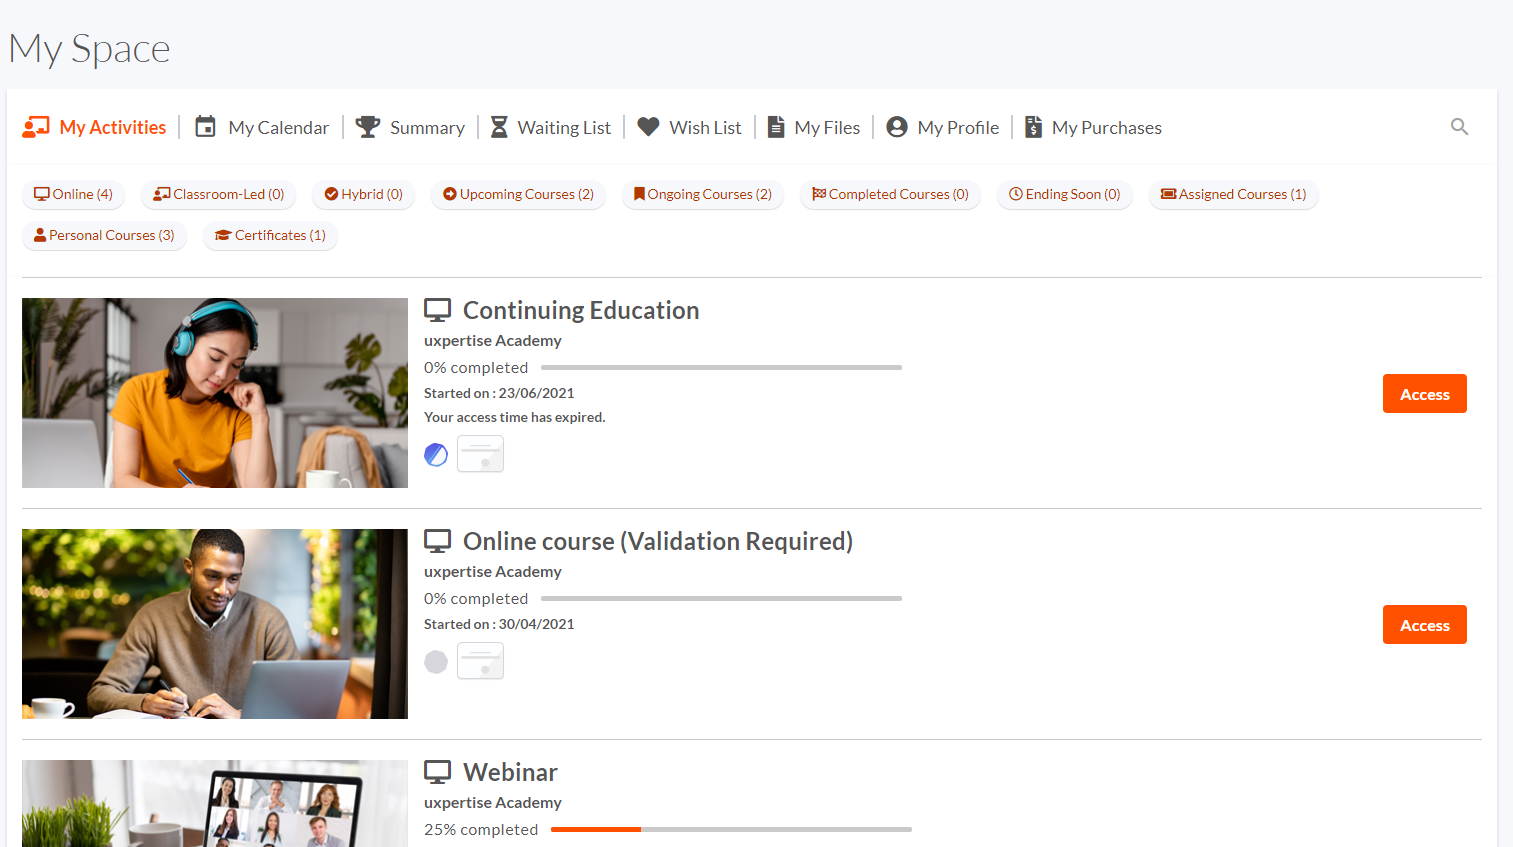 Learner space to access enrollments, wish list, waiting list, profile, dashboard, purchases, etc.